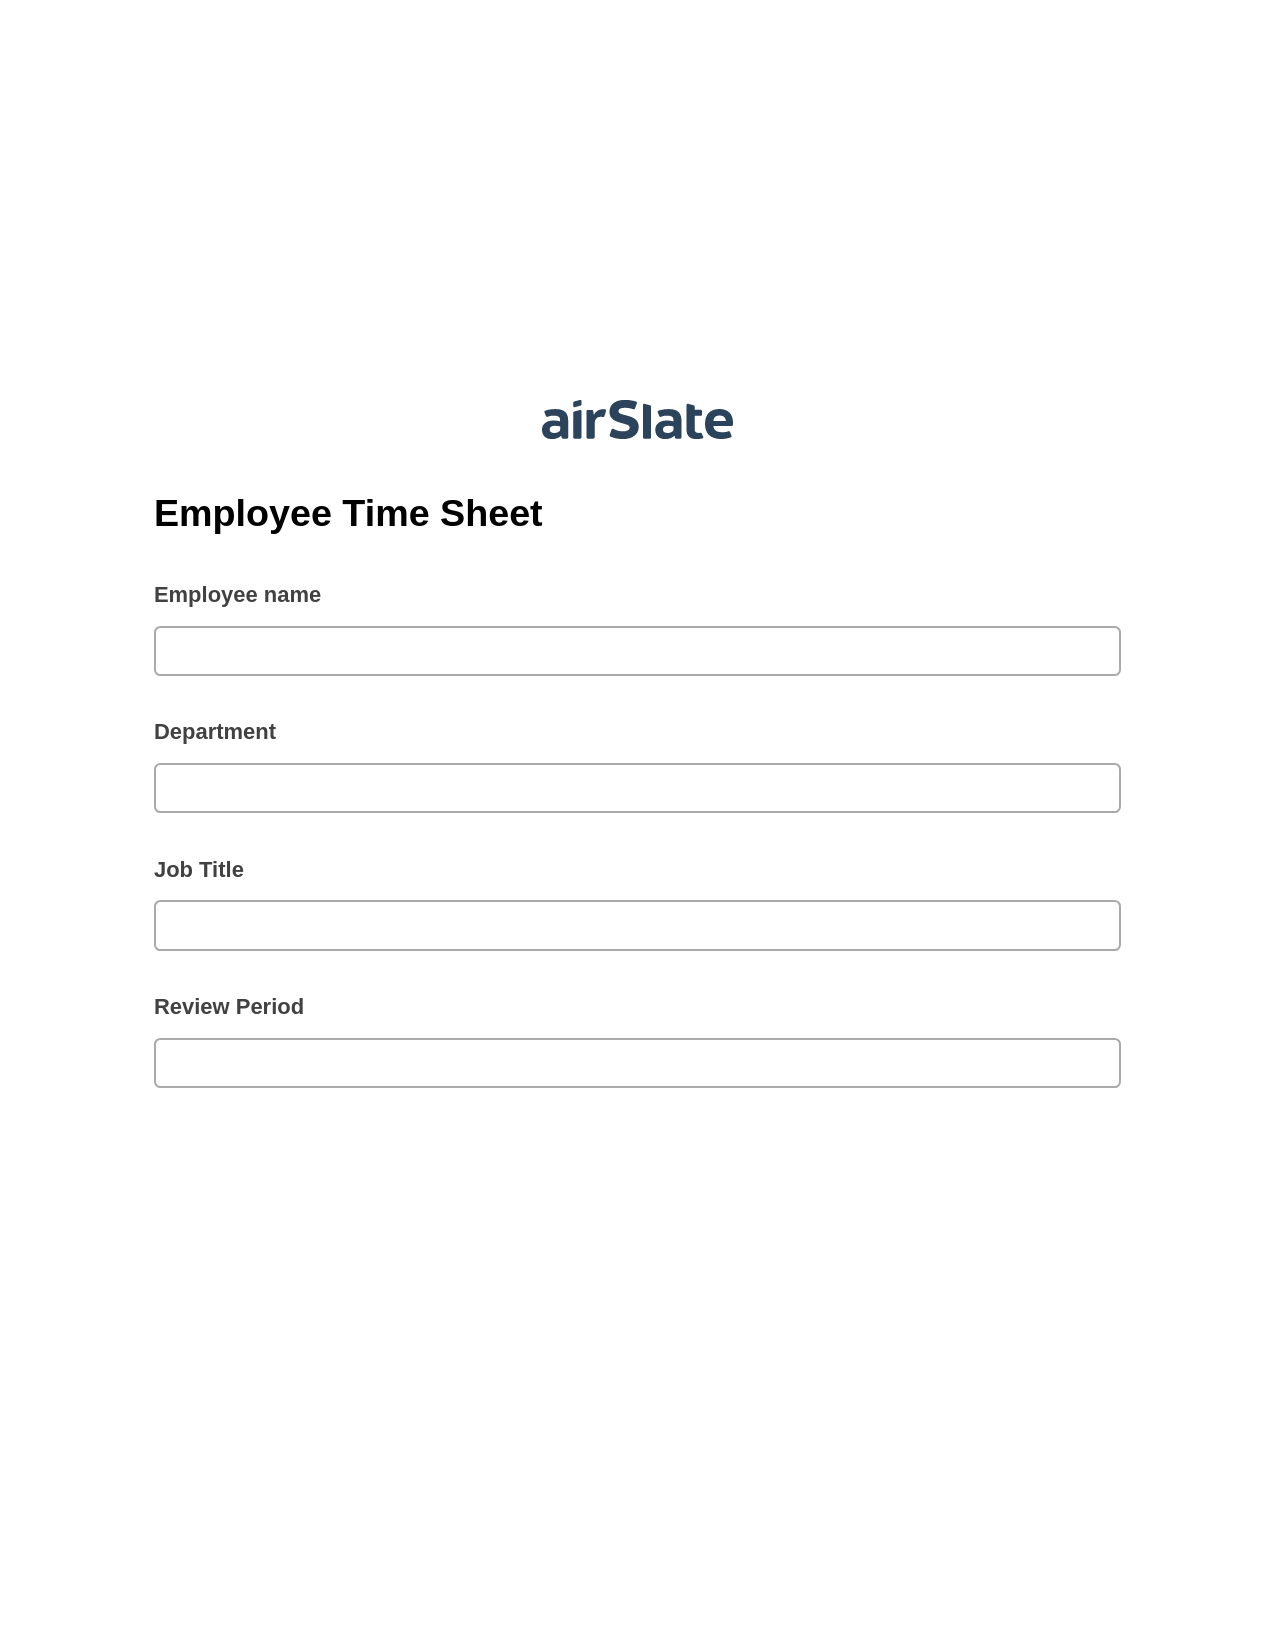 Multirole Employee Time Sheet Pre-fill Dropdowns from Airtable, Create Salesforce Records Bot, Export to Google Sheet Bot